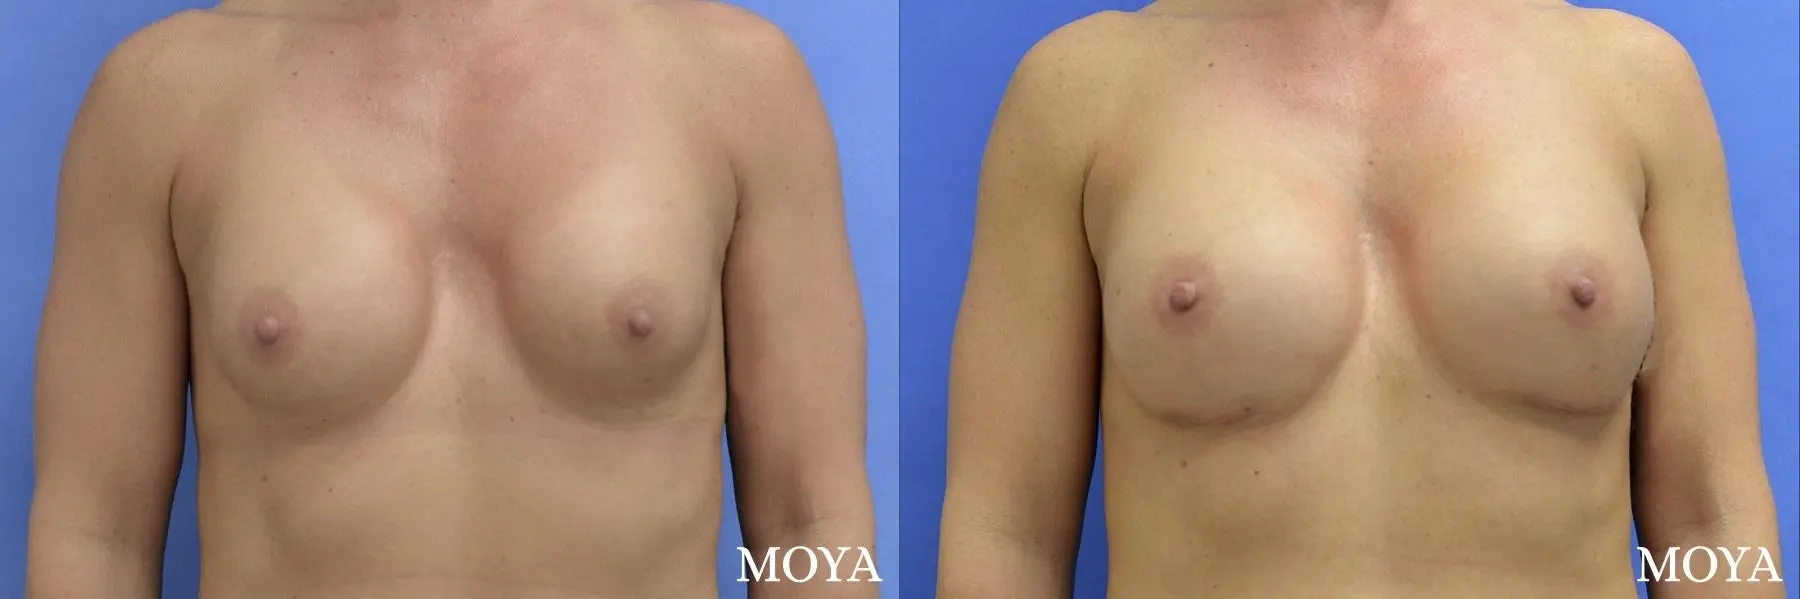 Breast Implant Exchange: Patient 4 - Before and After 5